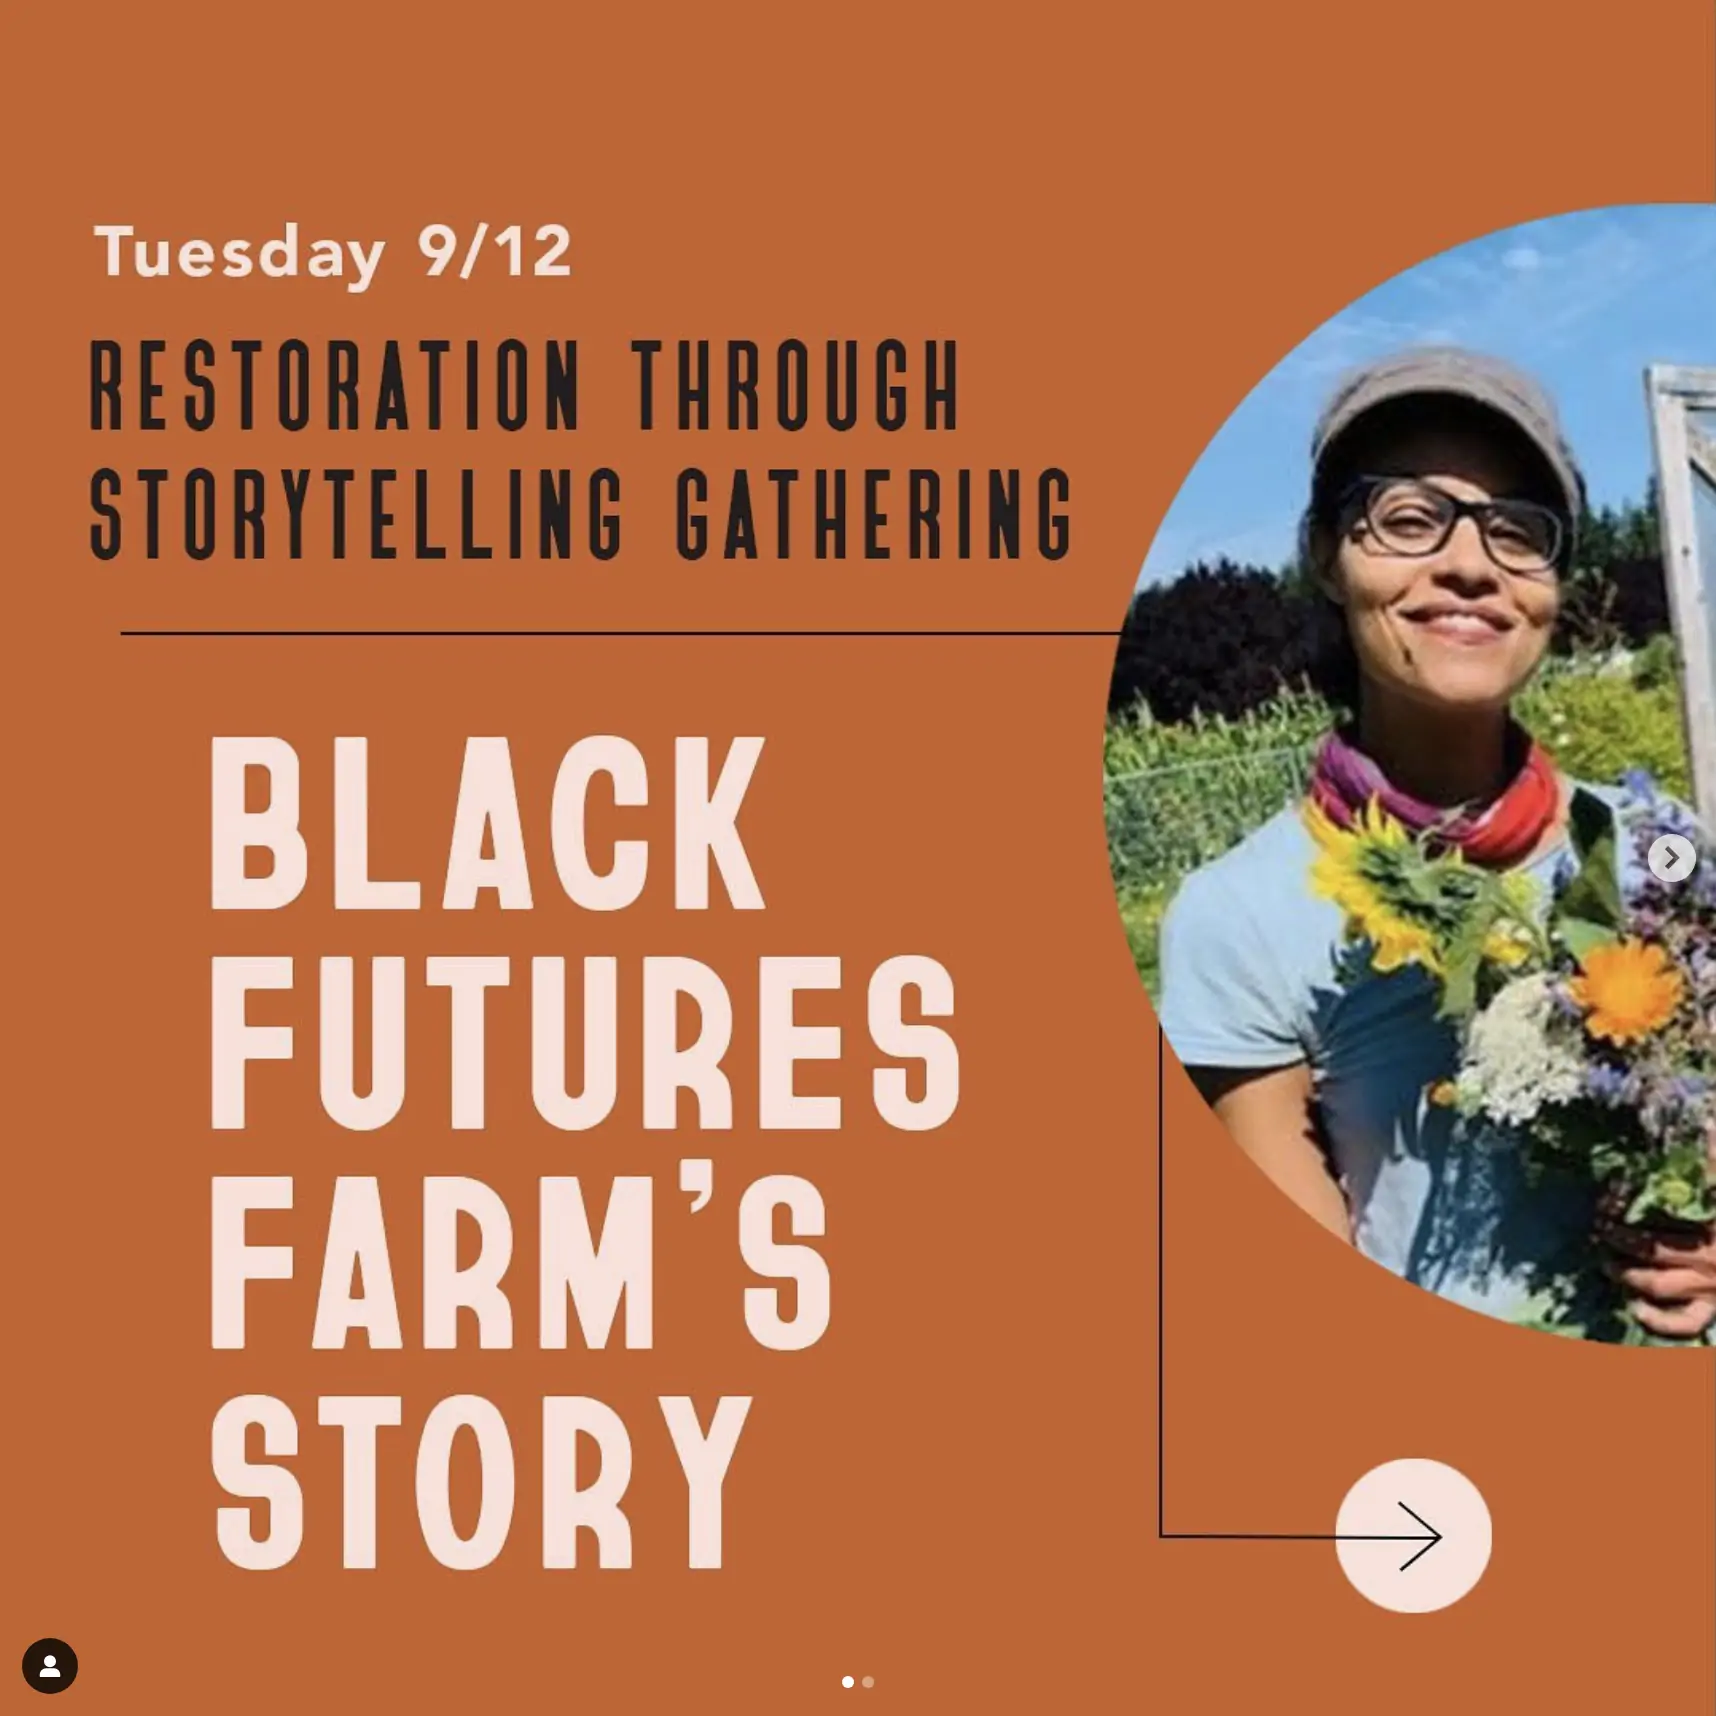 A promotional graphic with text: Tuesday, 9/12 Restoration through Storytelling Gathering: Black Futures Farm's Story